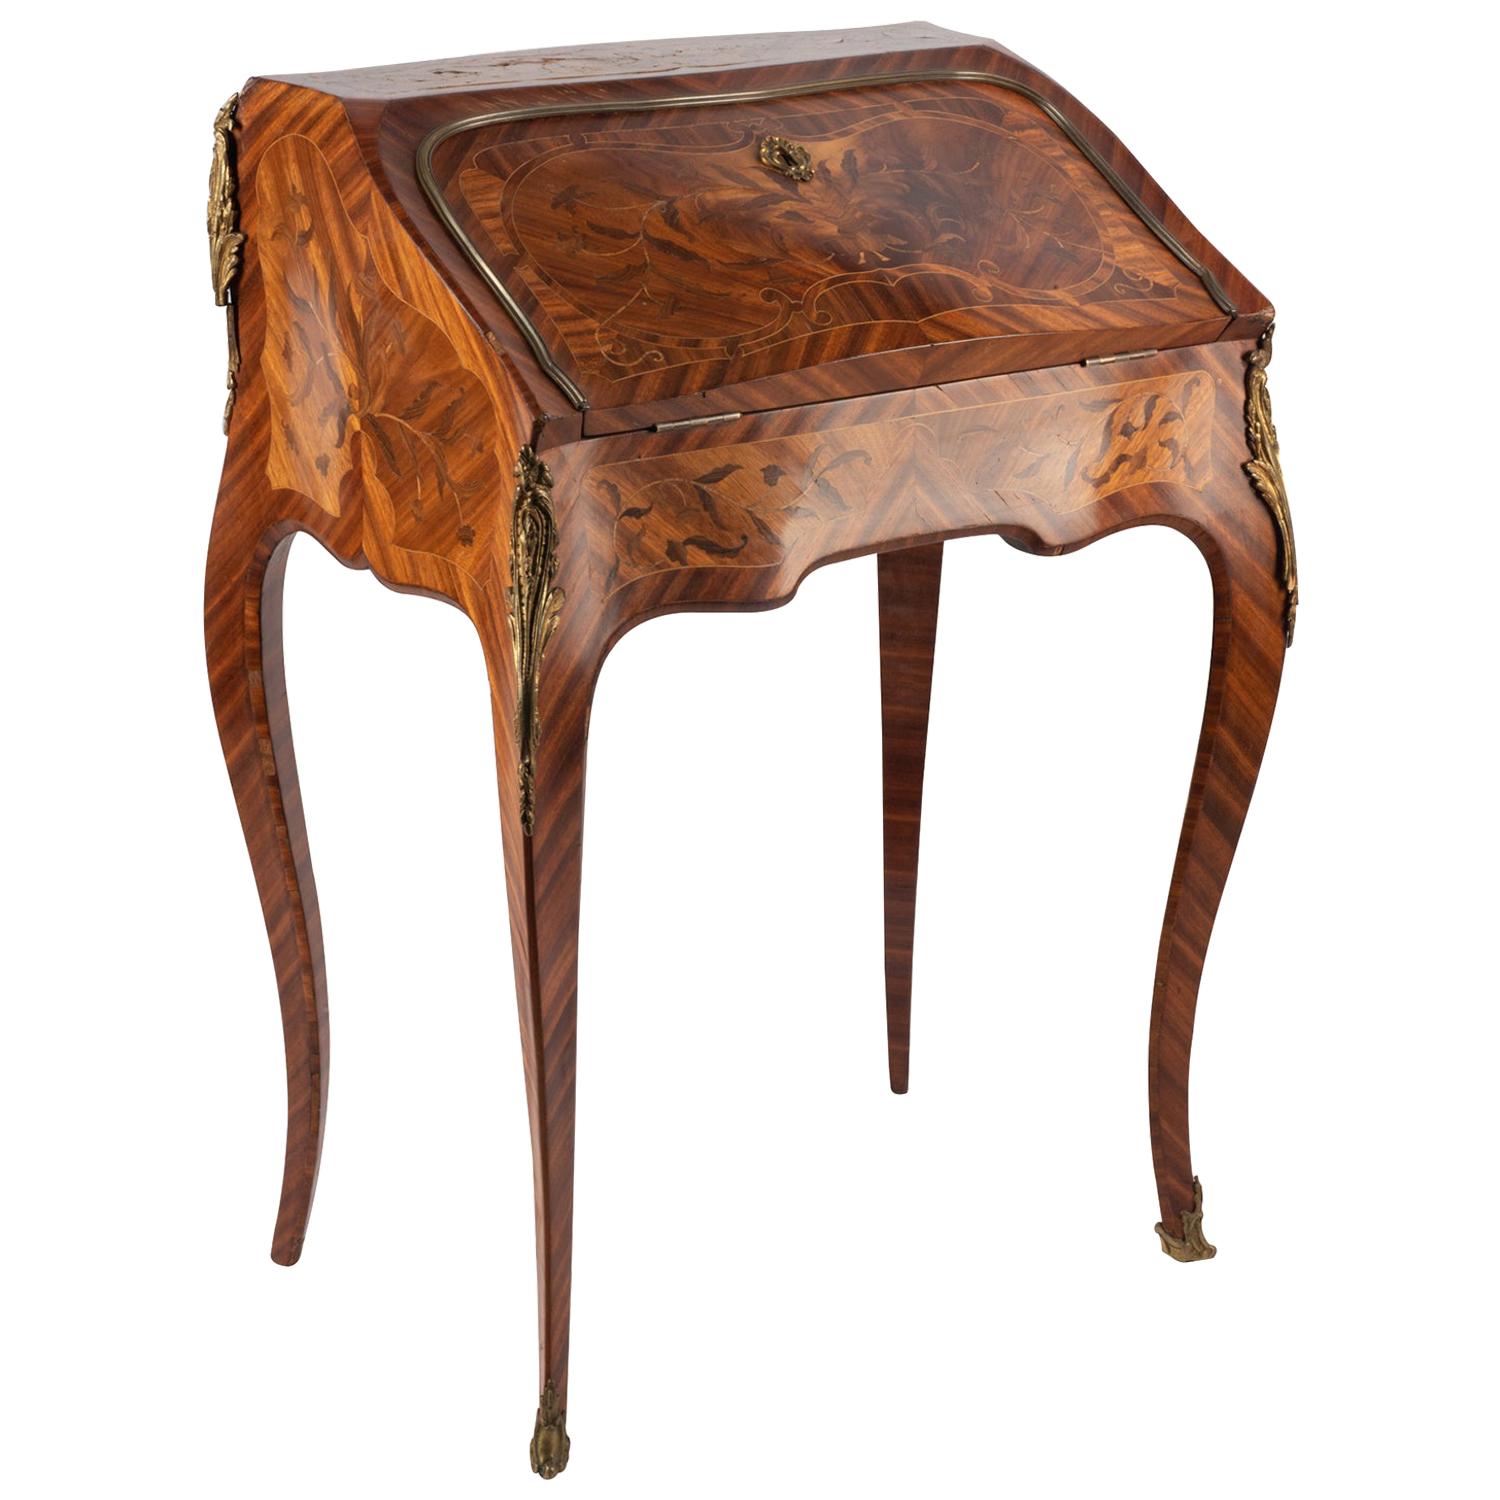 Late 19th Century French Ladies Writing Desk